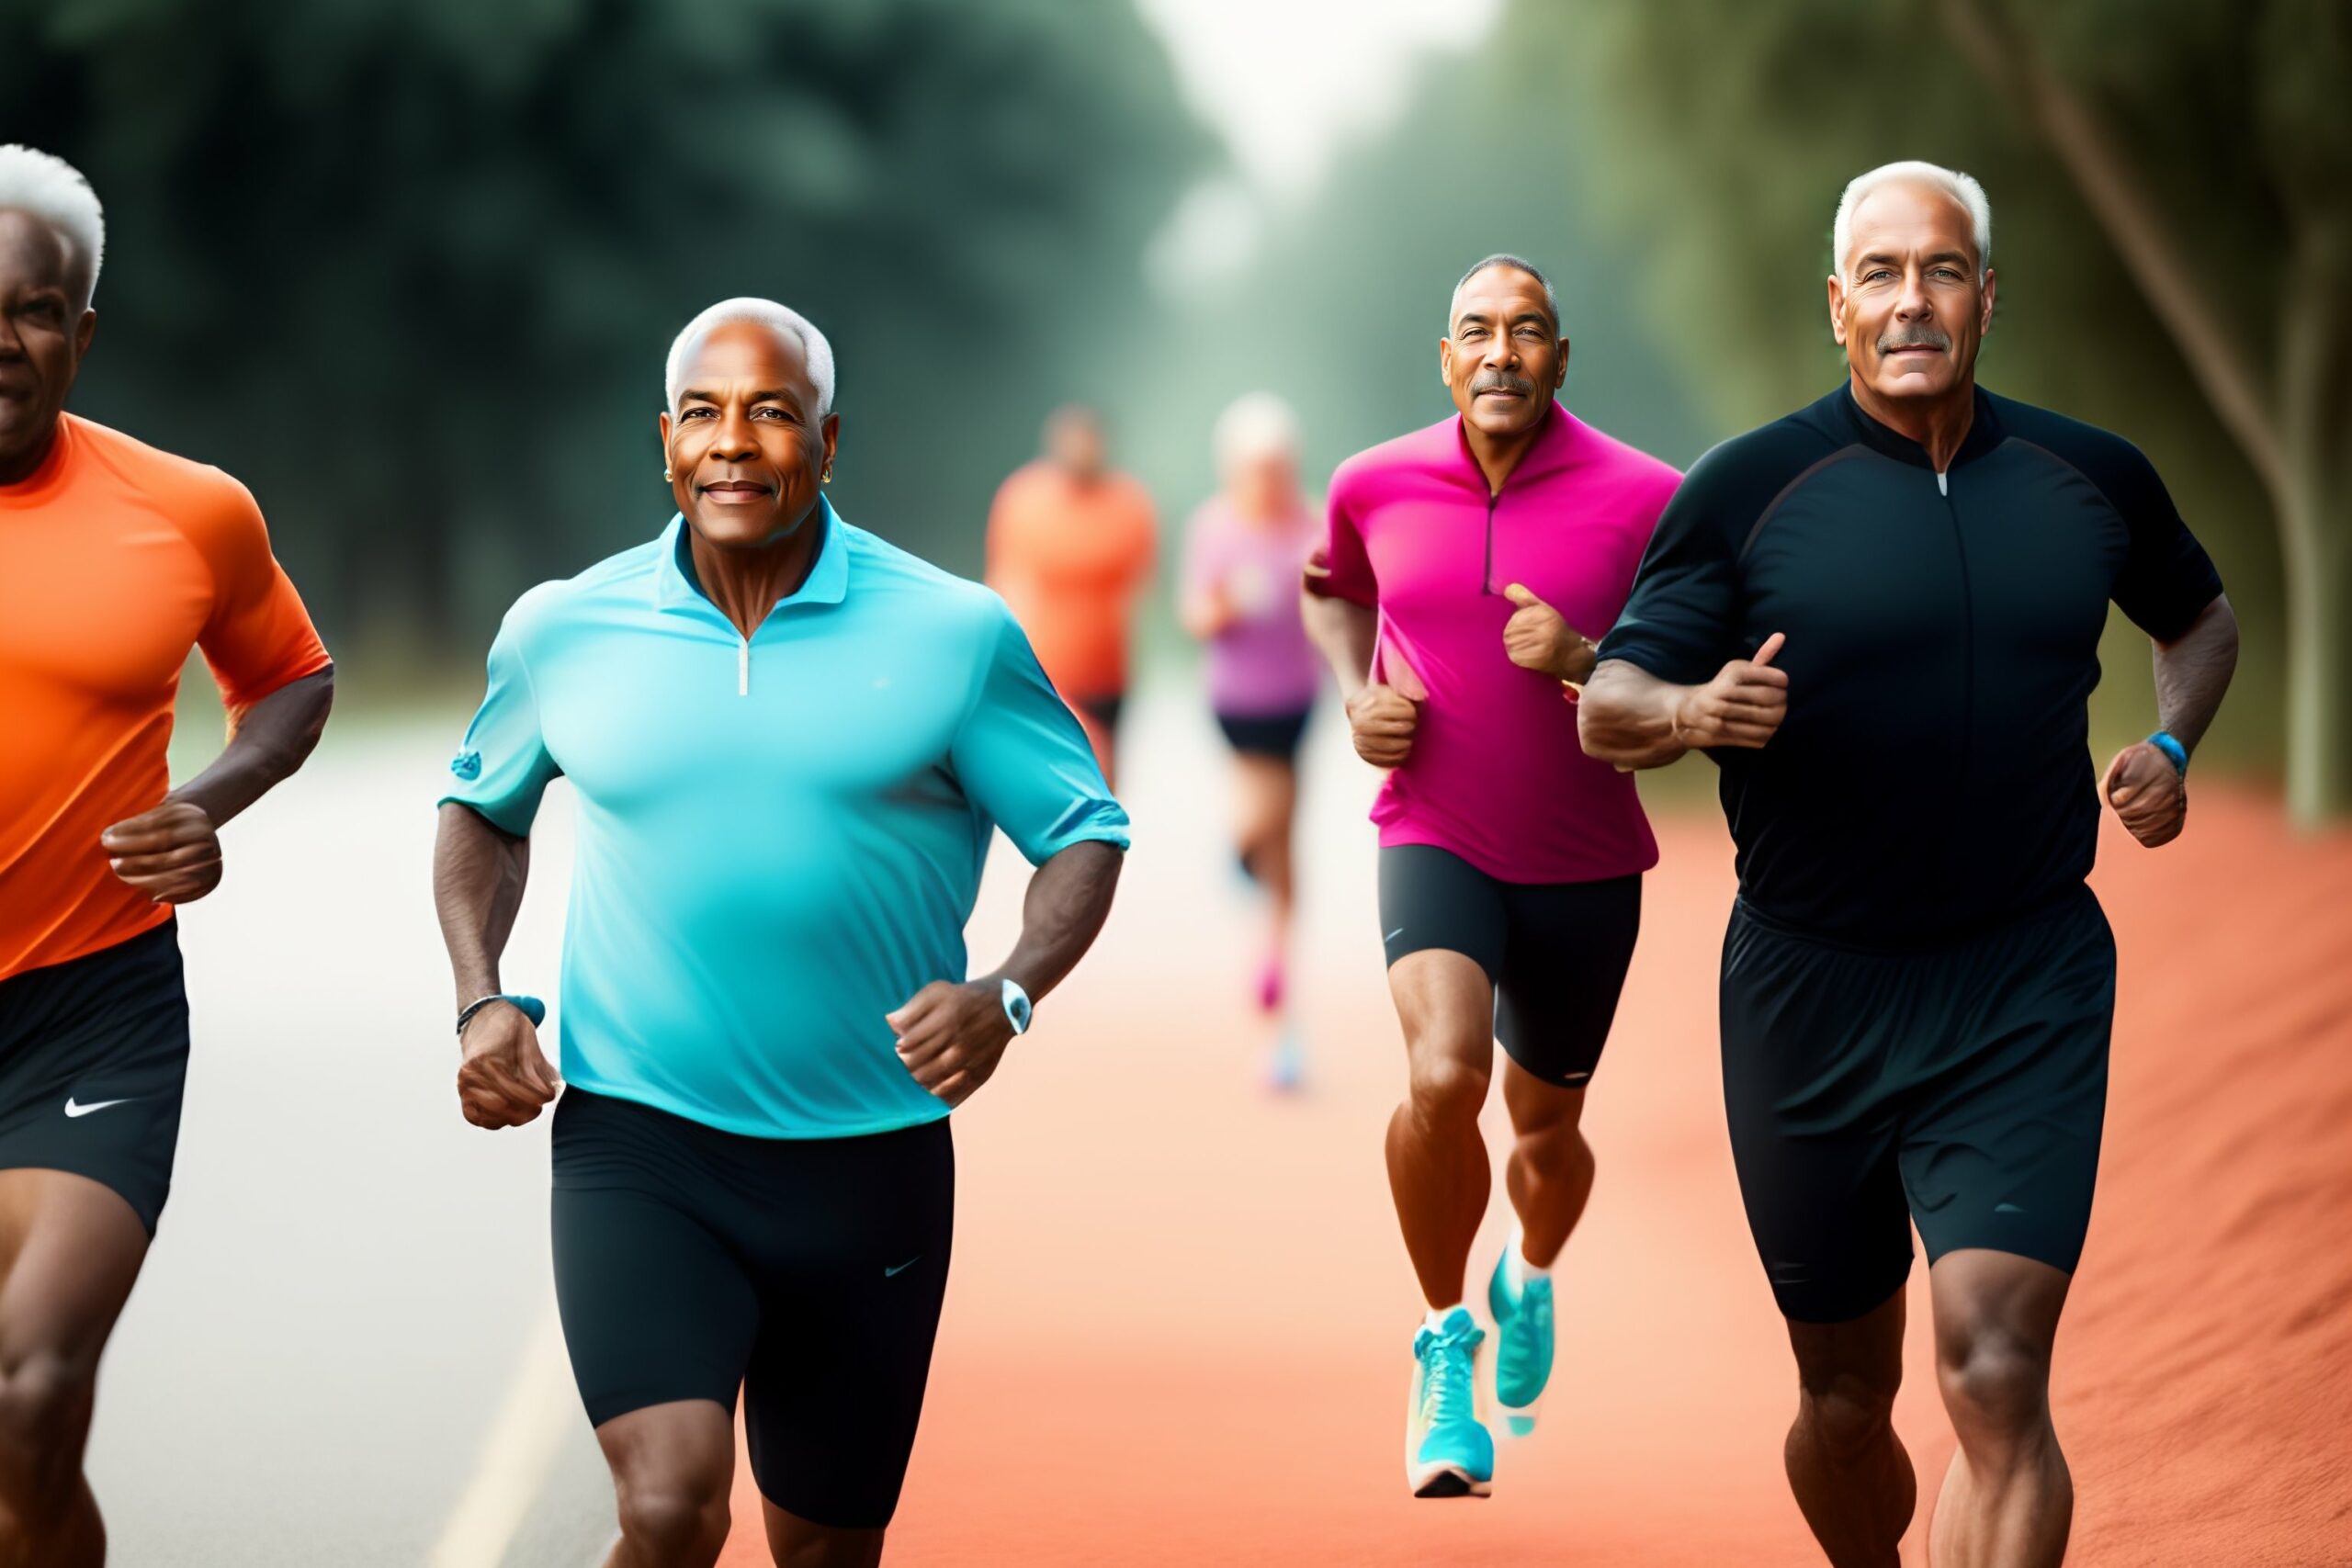 Healthyfy Drive The Benefits of Regular Exercise Why You Should Make Time for Physical Activity